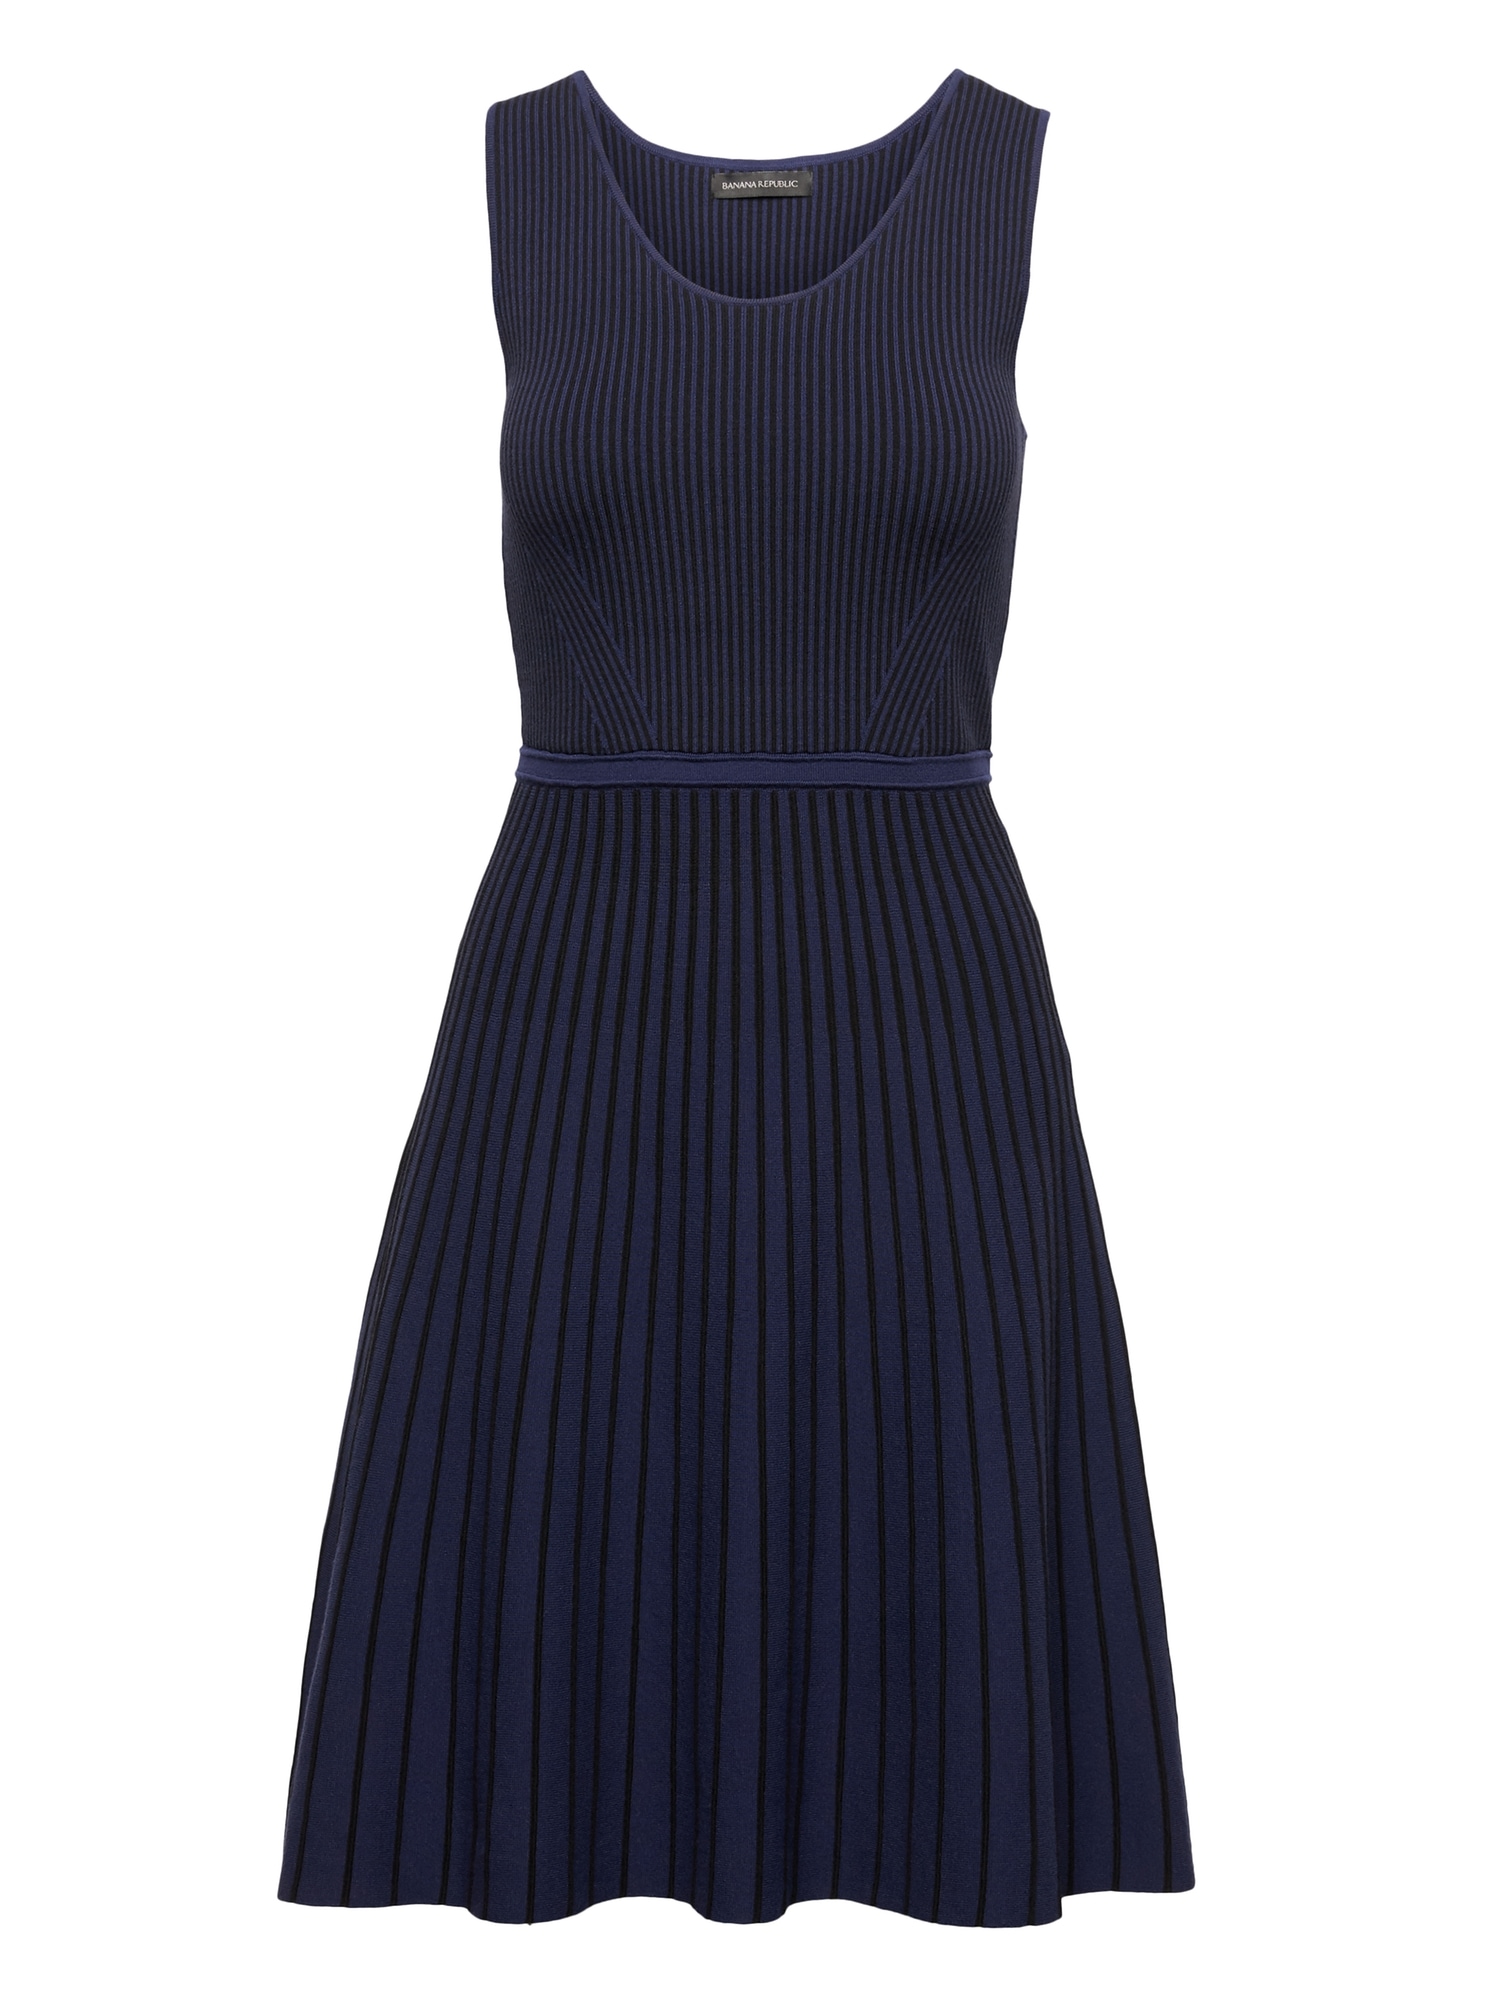 Petite Stripe-Knit Fit-and-Flare Dress